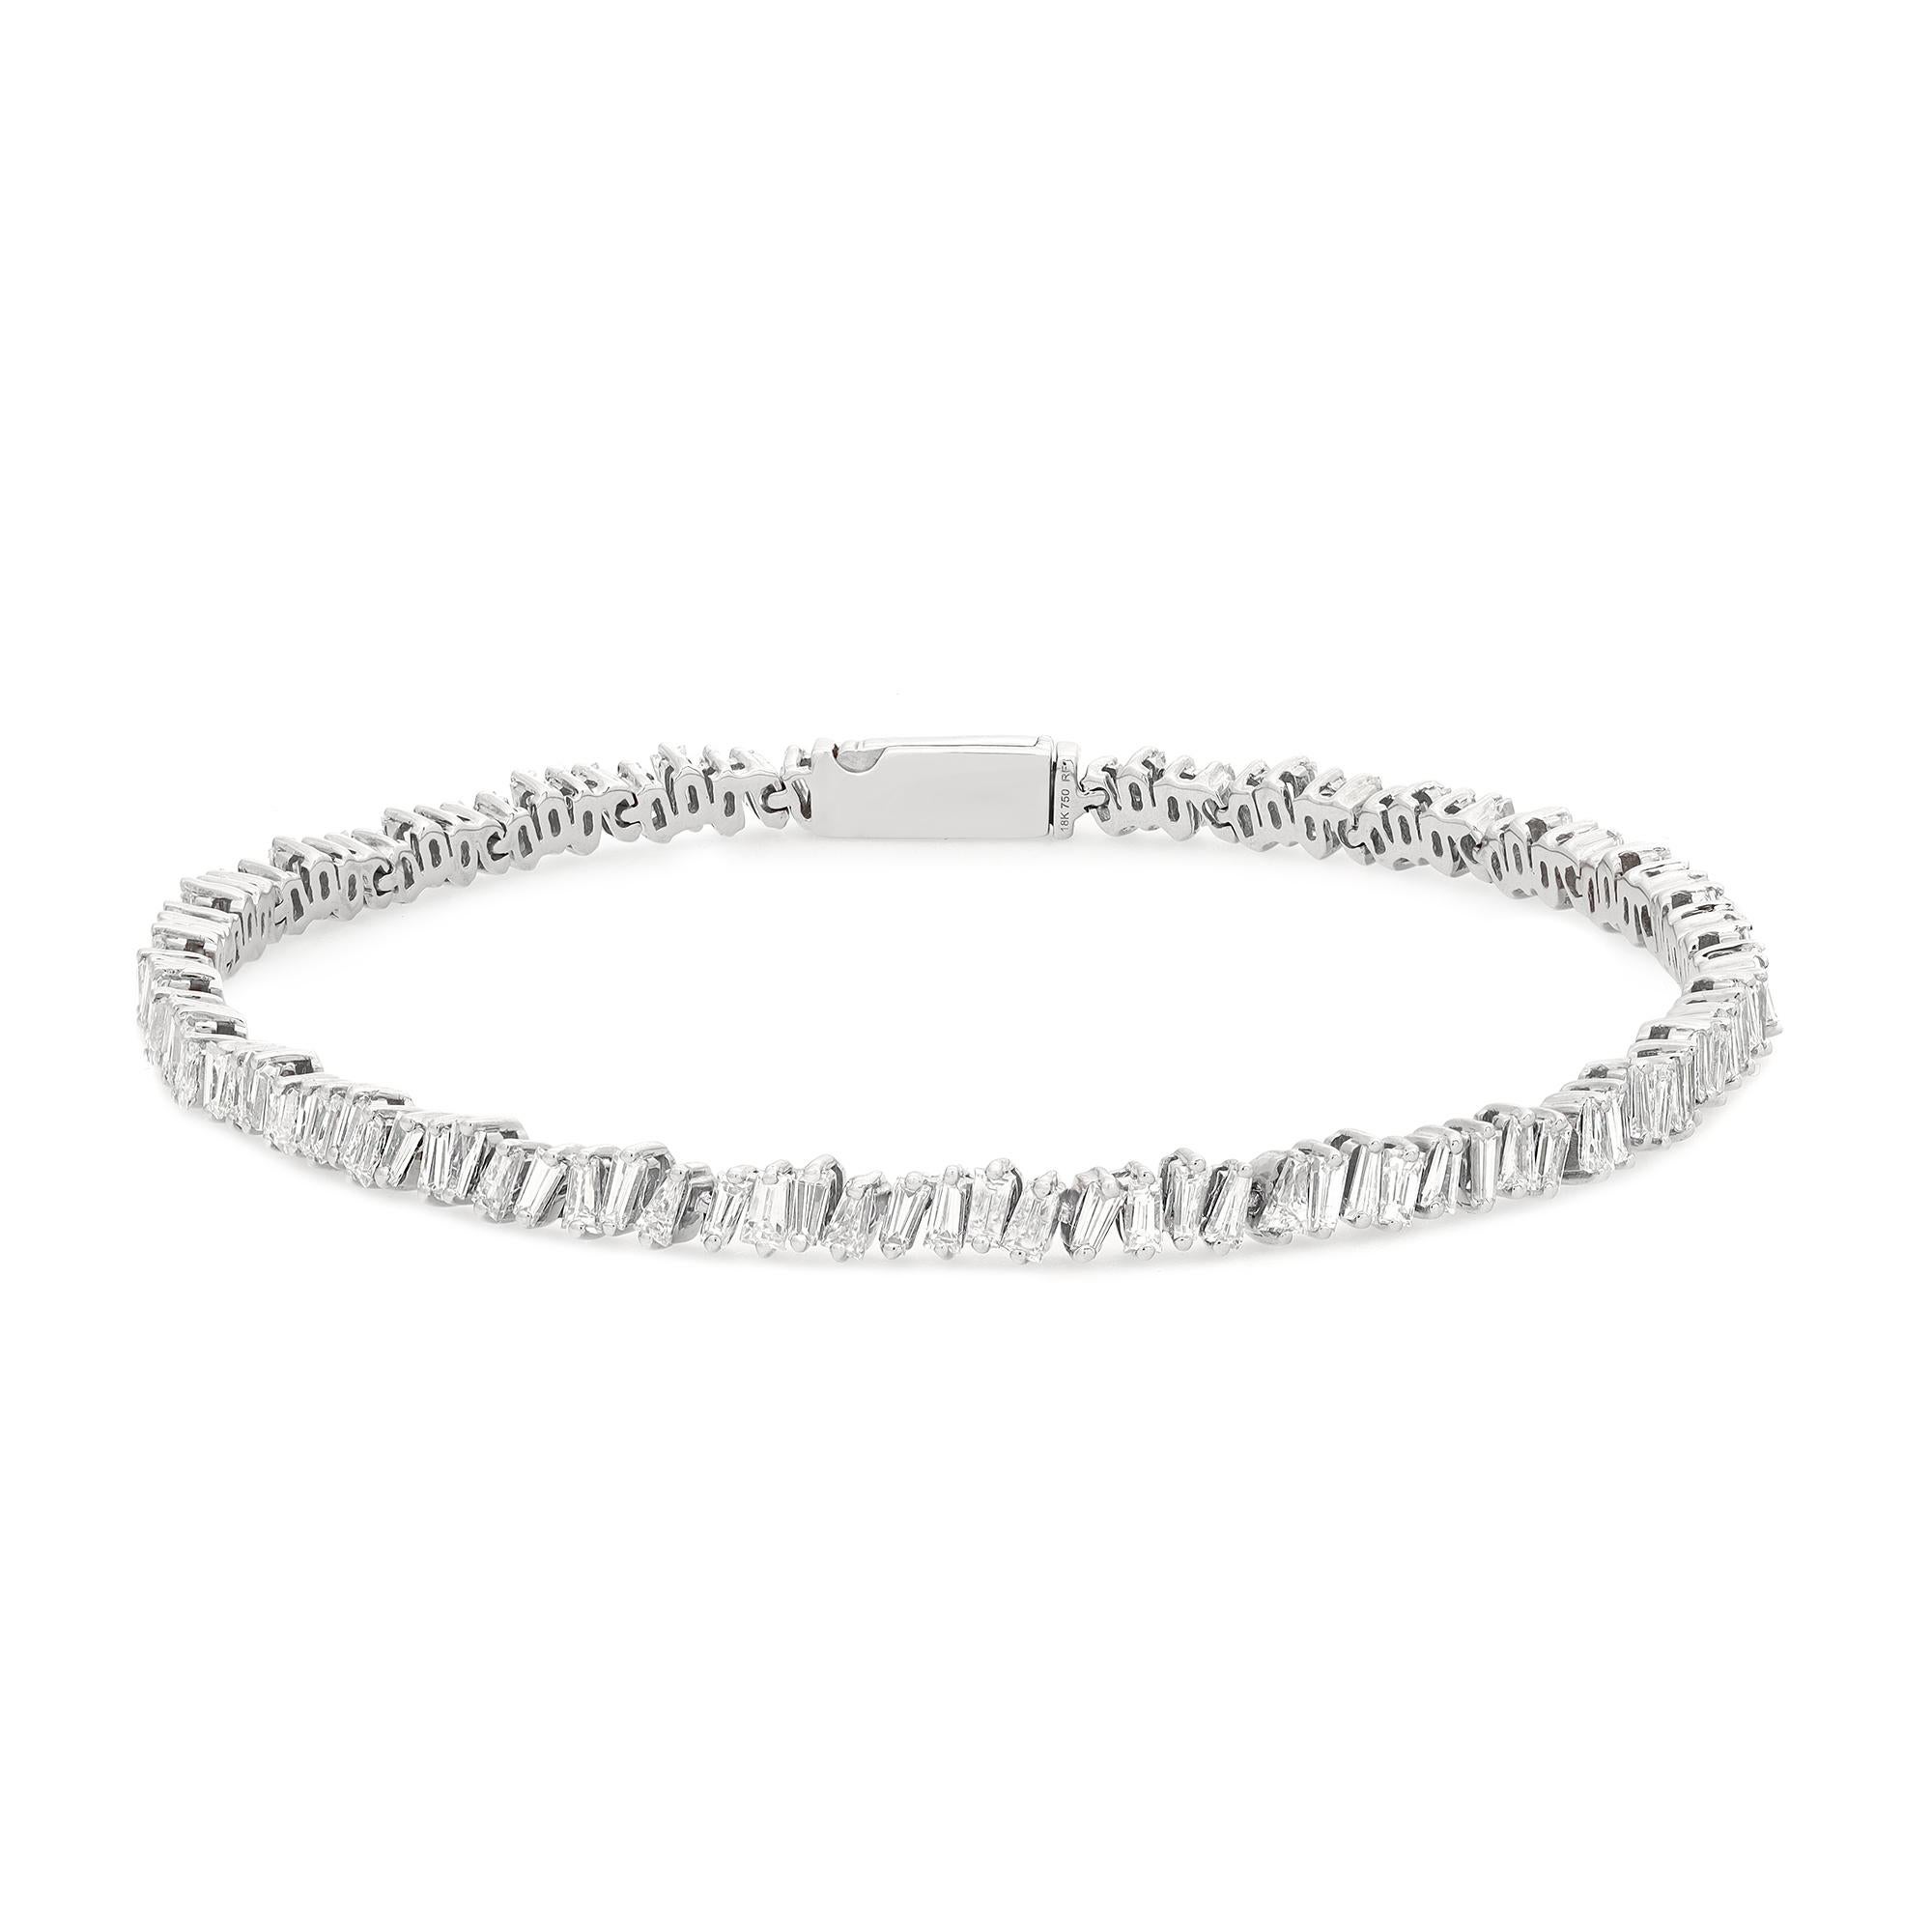 This beautifully crafted Rachael Koen timeless beauty tennis bracelet features baguettes cut natural diamonds set in prong setting. Crafted in 18k White Gold. This truly gorgeous handmade modern creation is a great addition to your jewelry